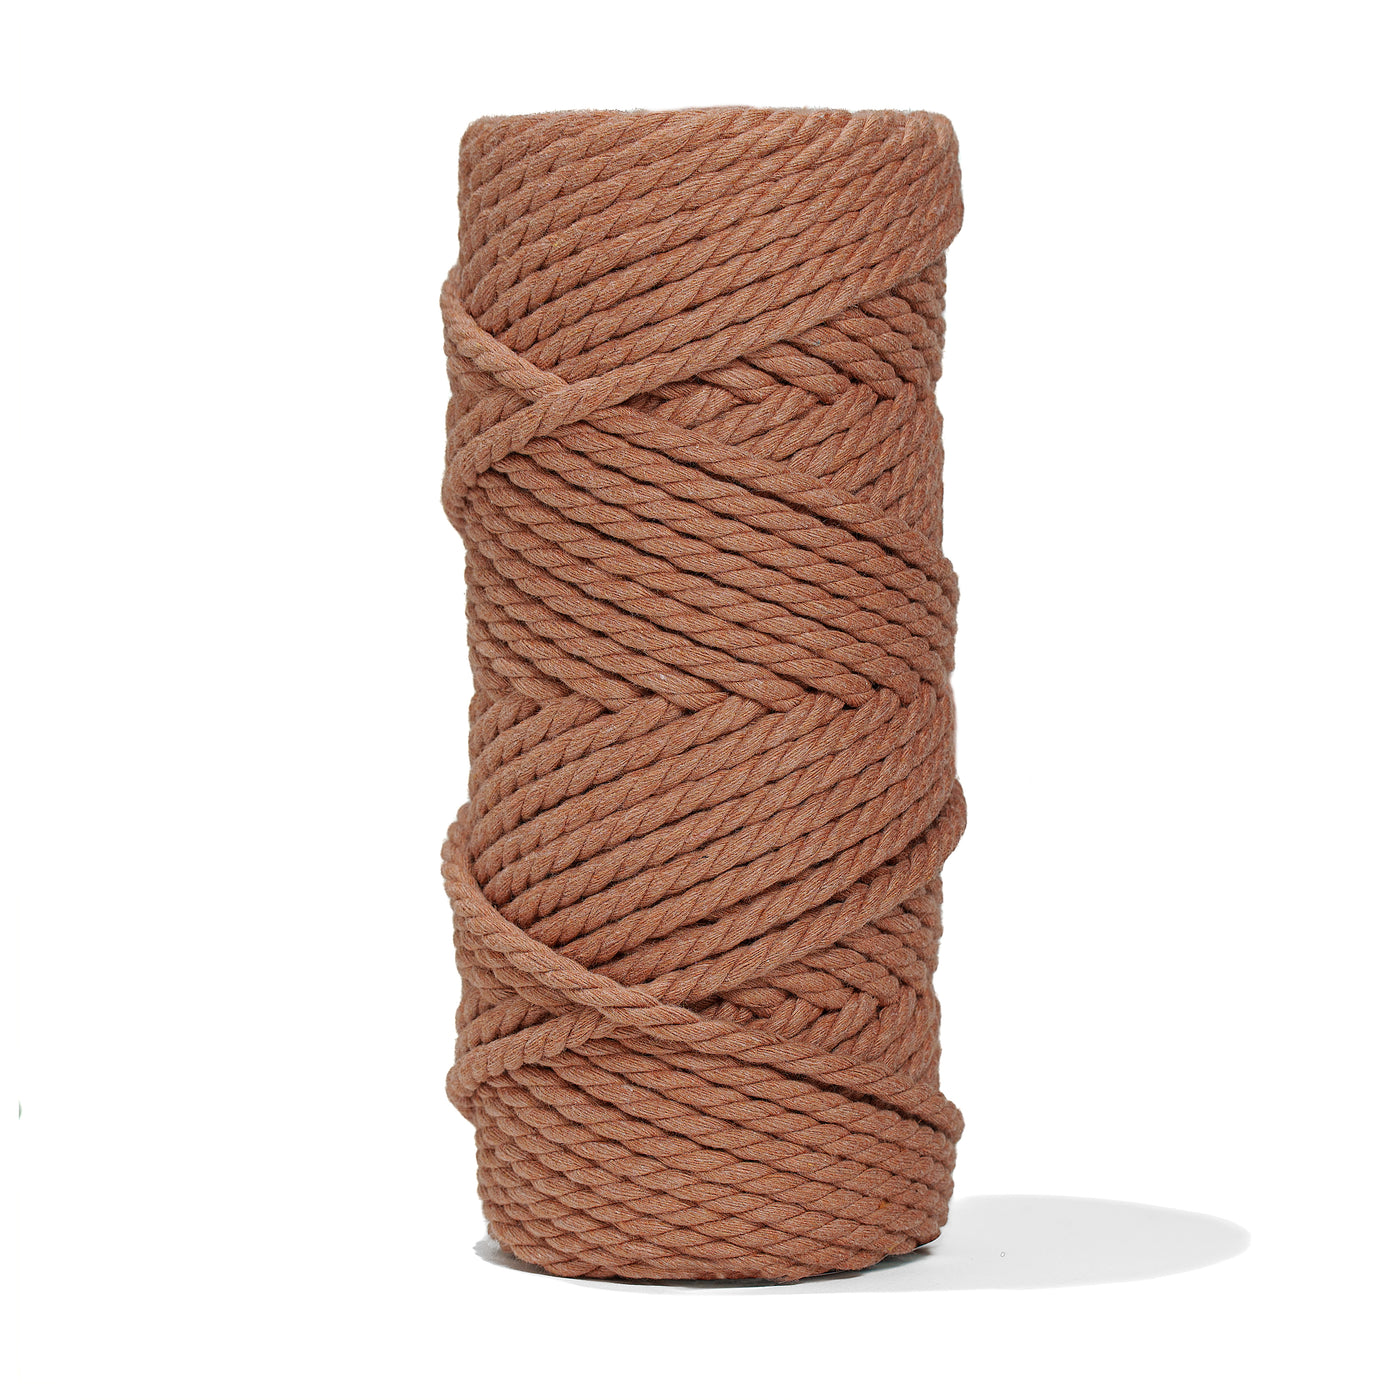 COTTON ROPE ZERO WASTE 5 MM - 3 PLY - CANYON COLOR